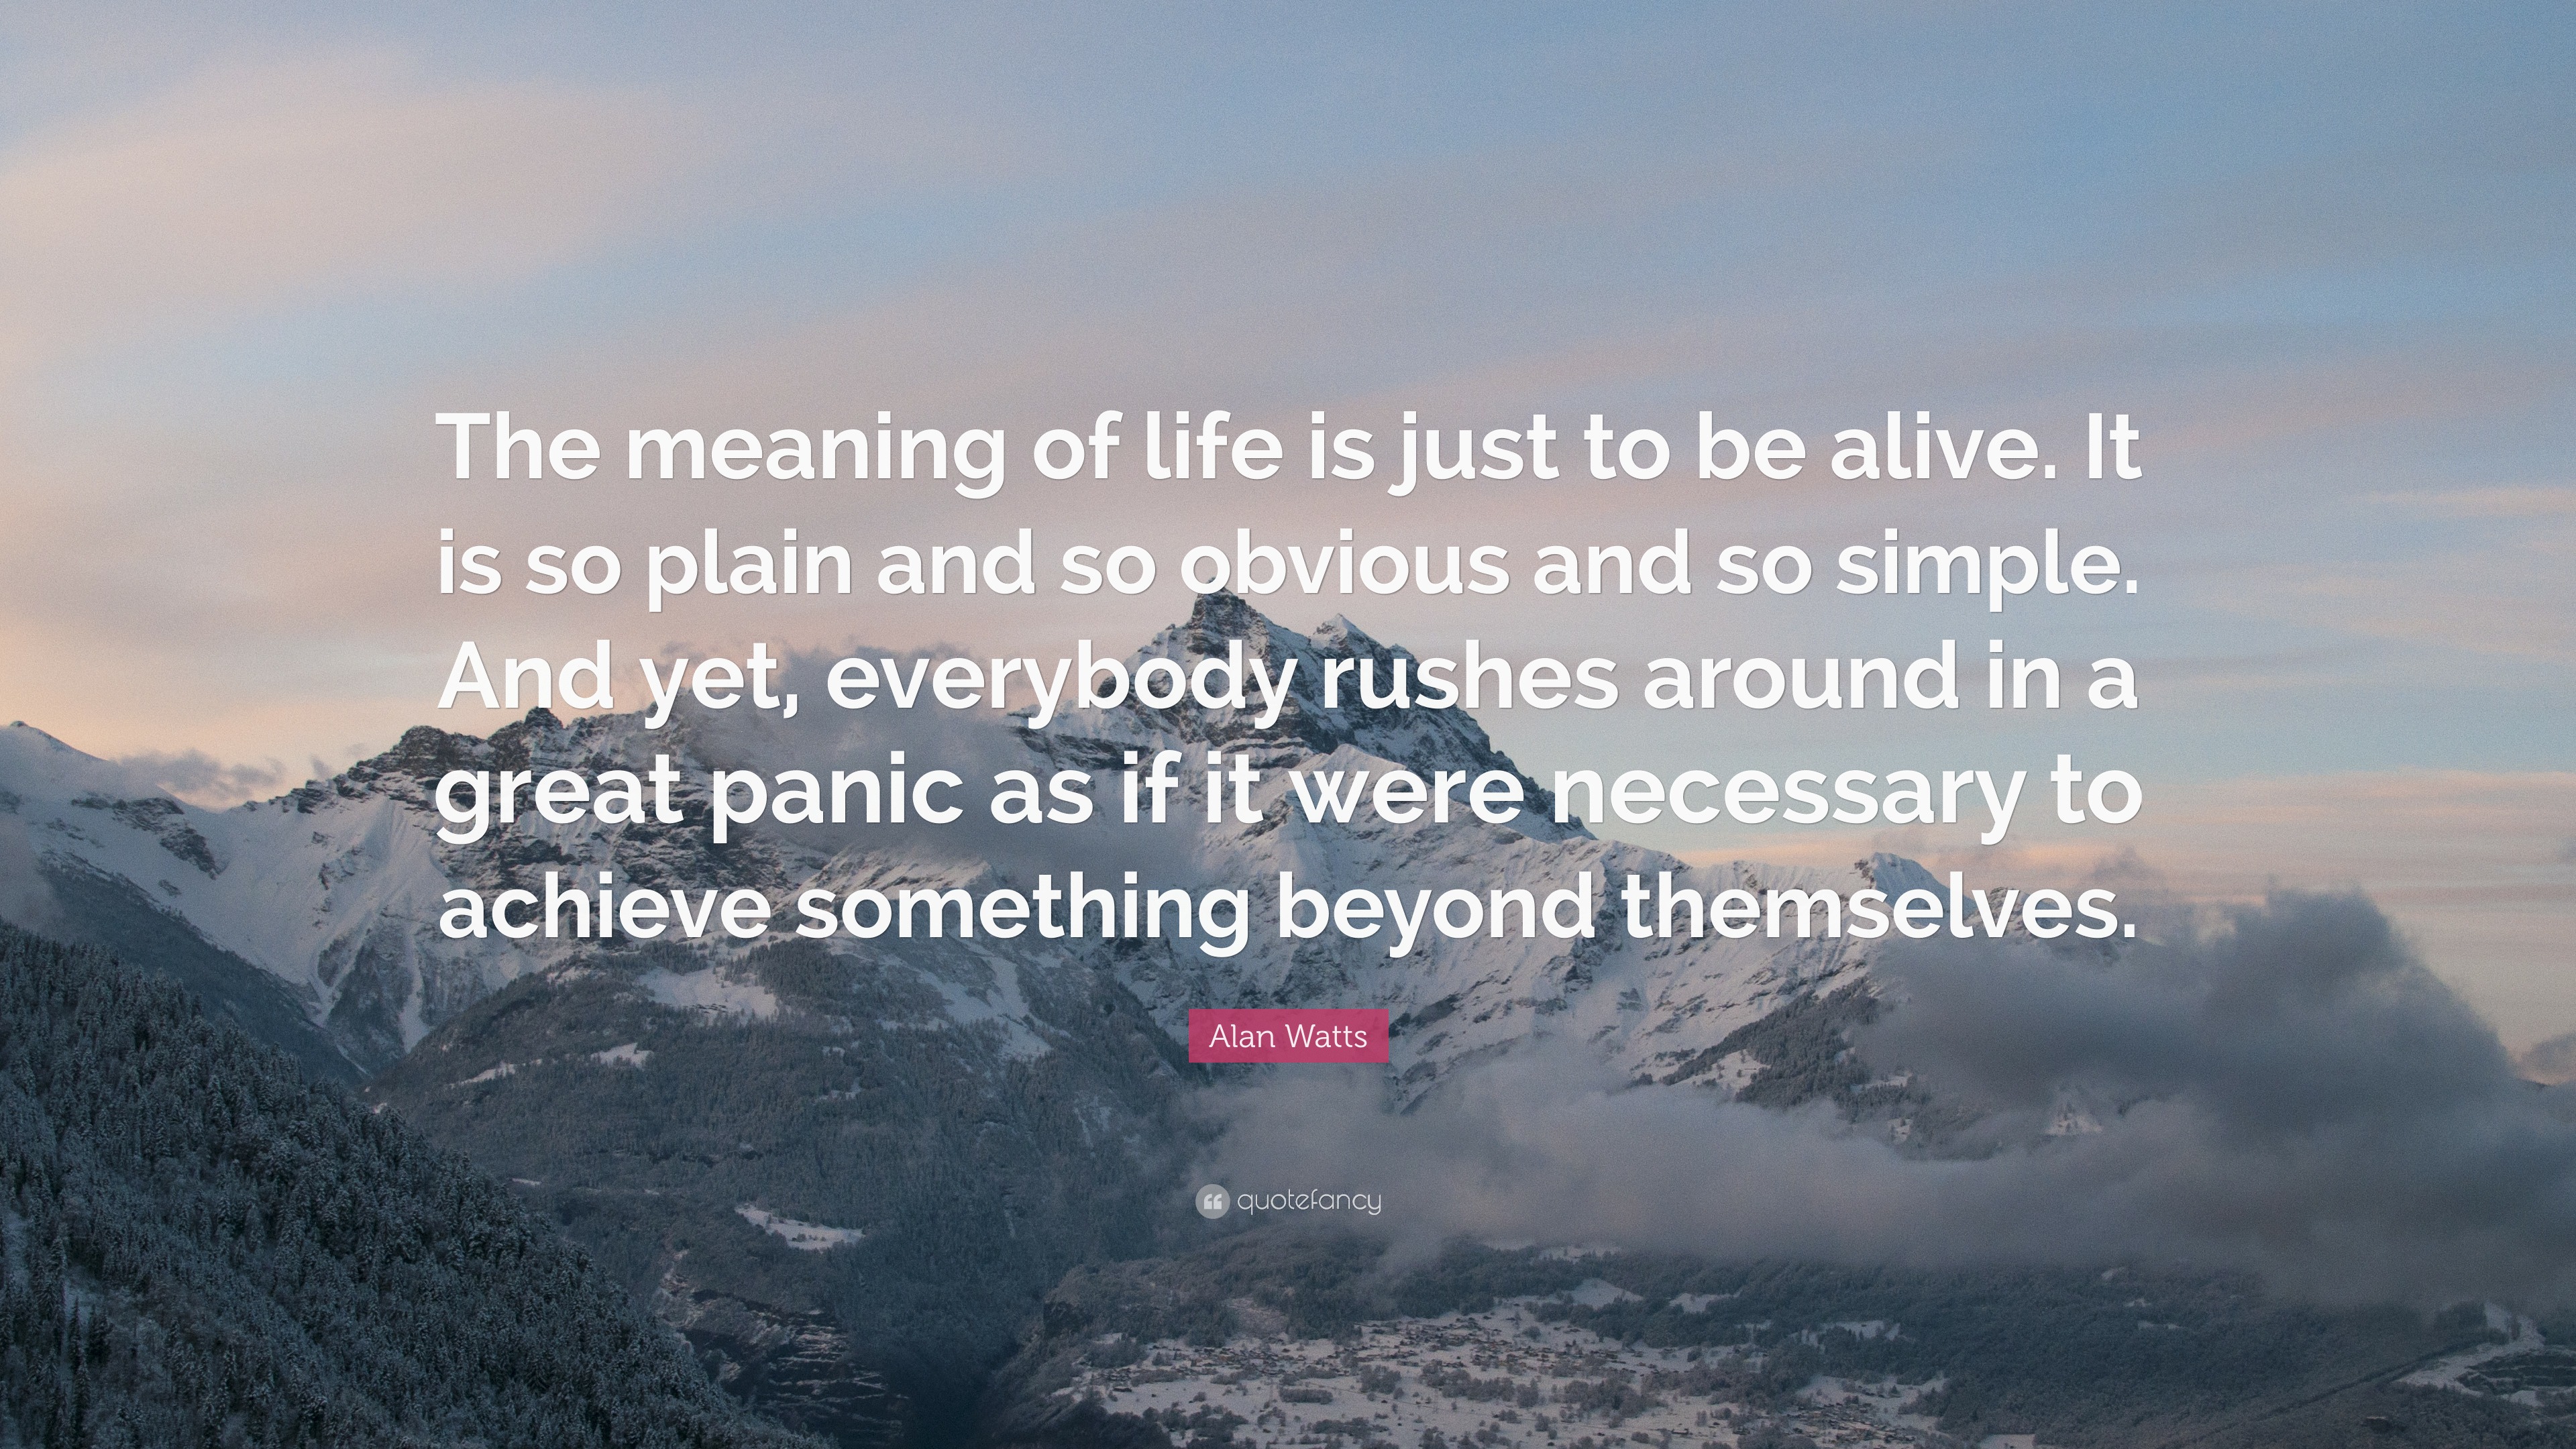 Alan Watts Quote “The meaning of life is just to be alive